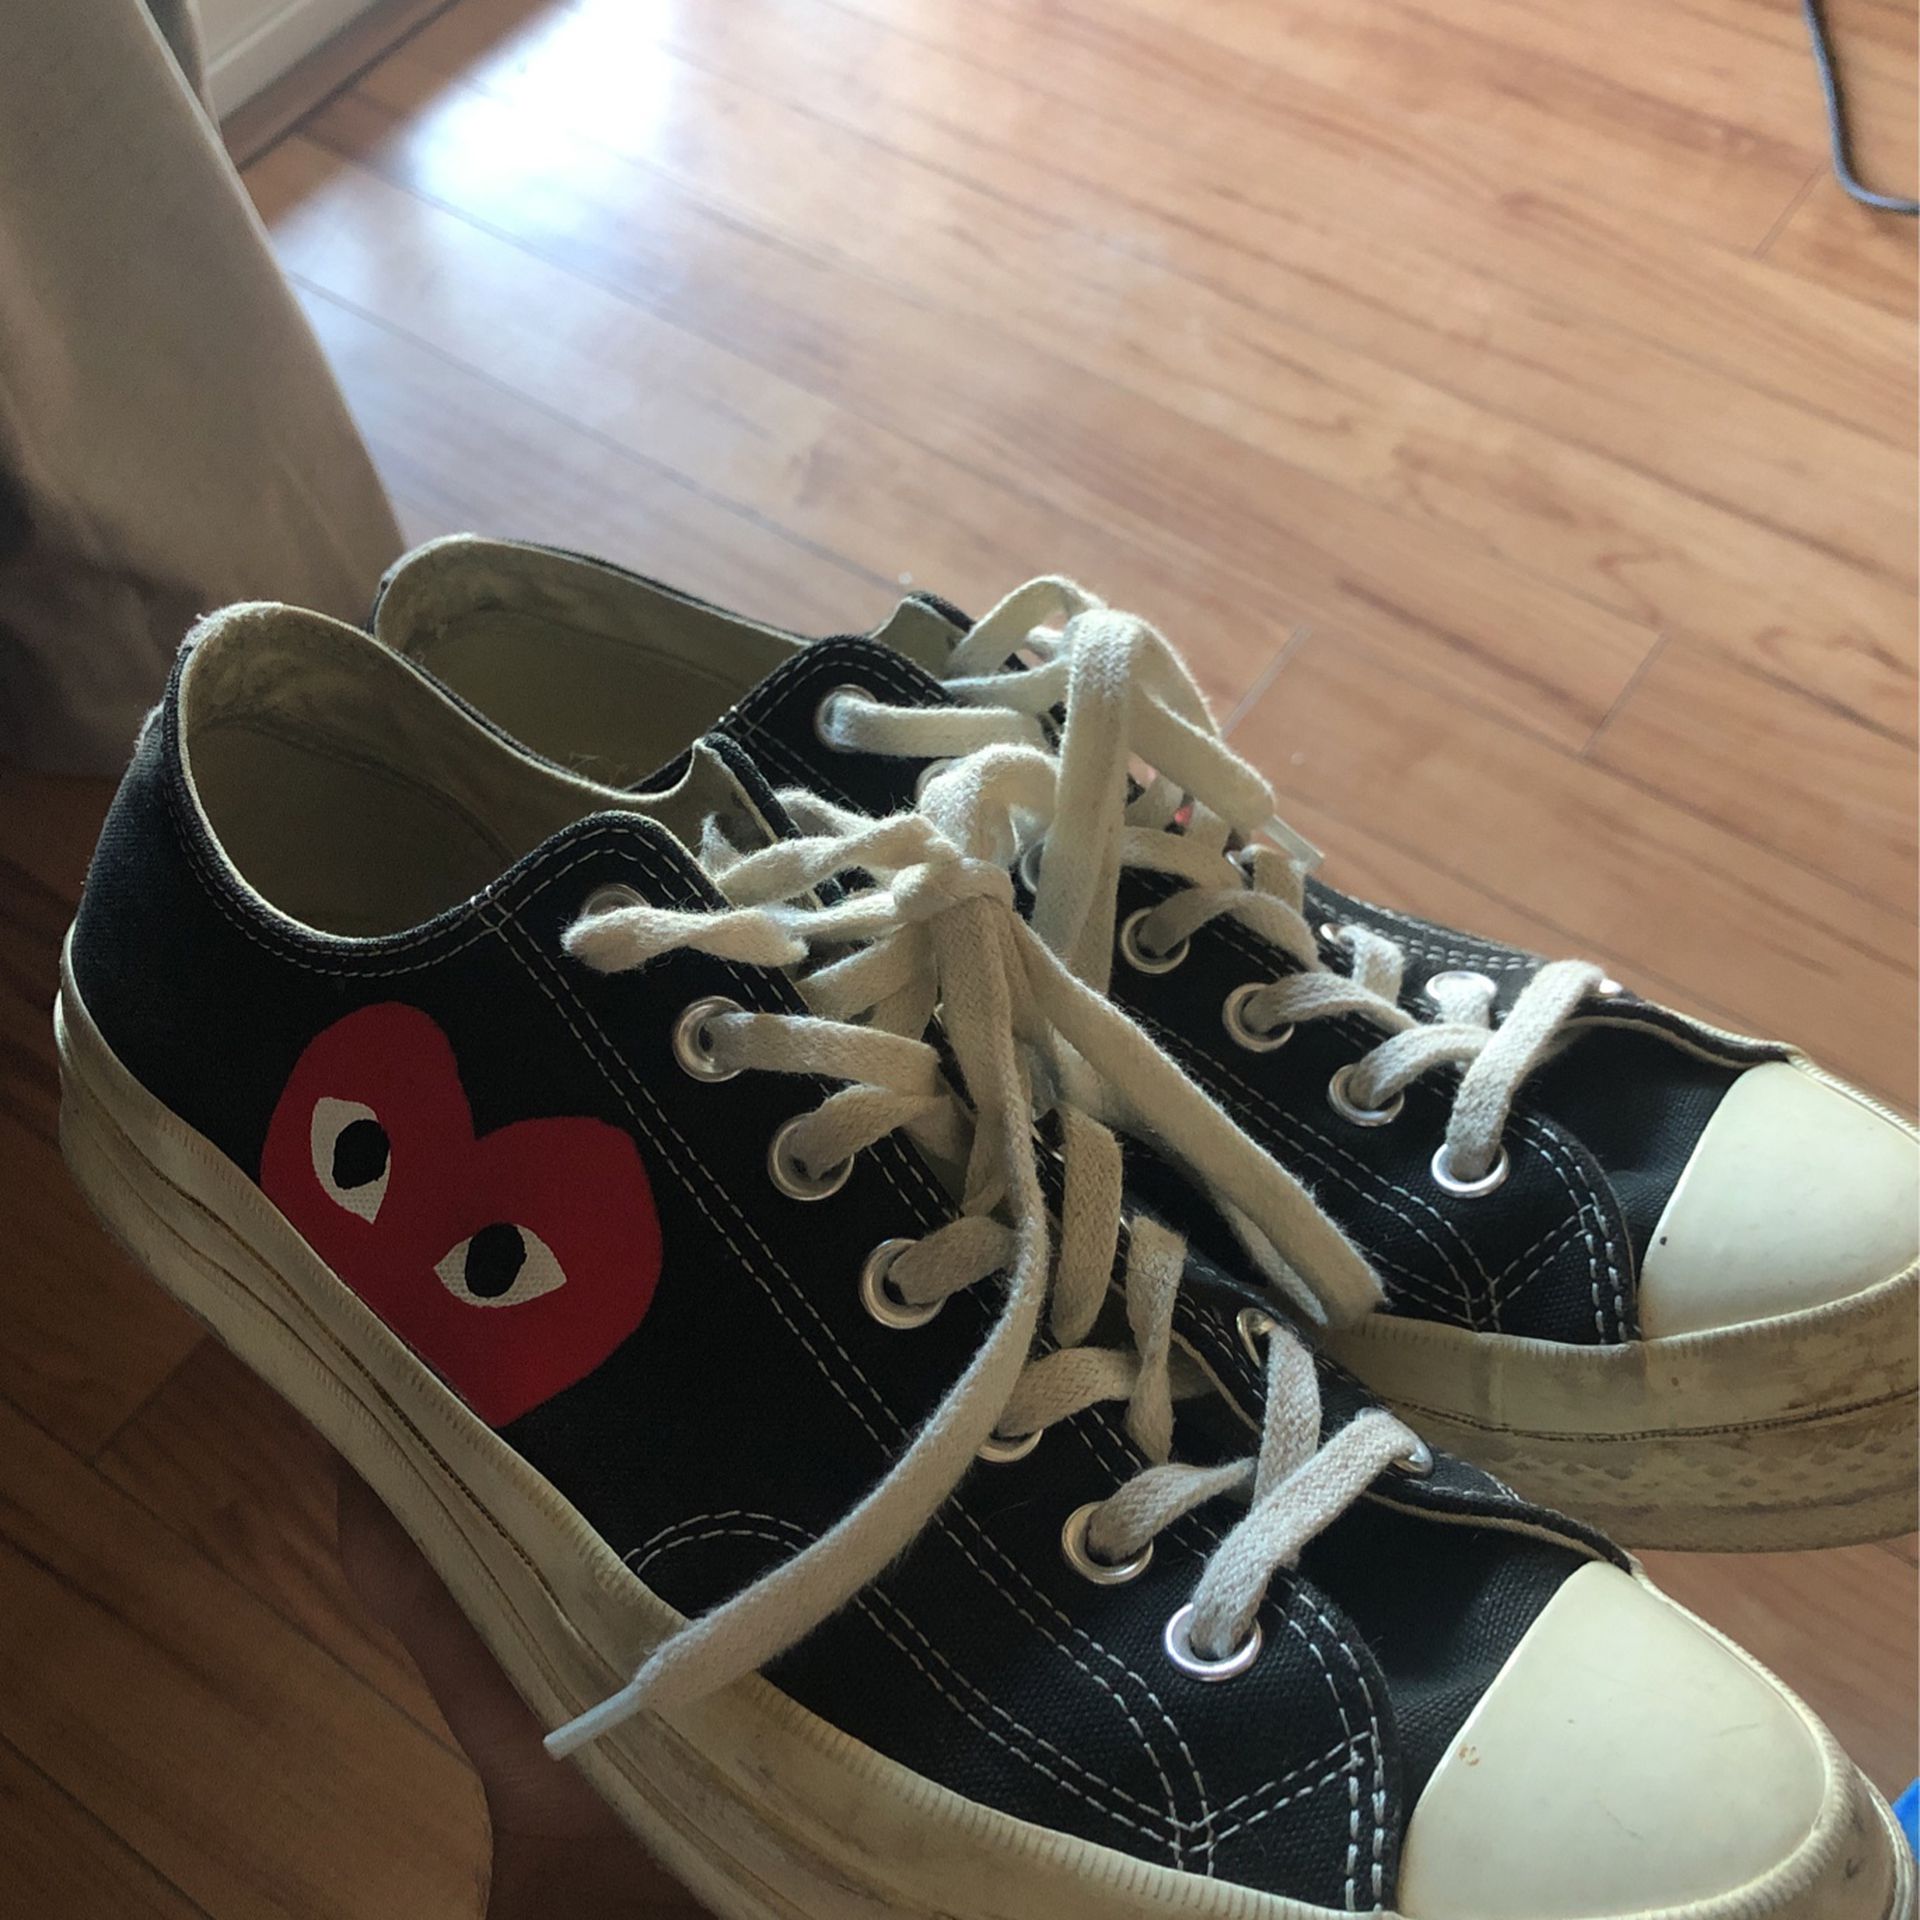 cdg converse size 10 (shoot for prices)